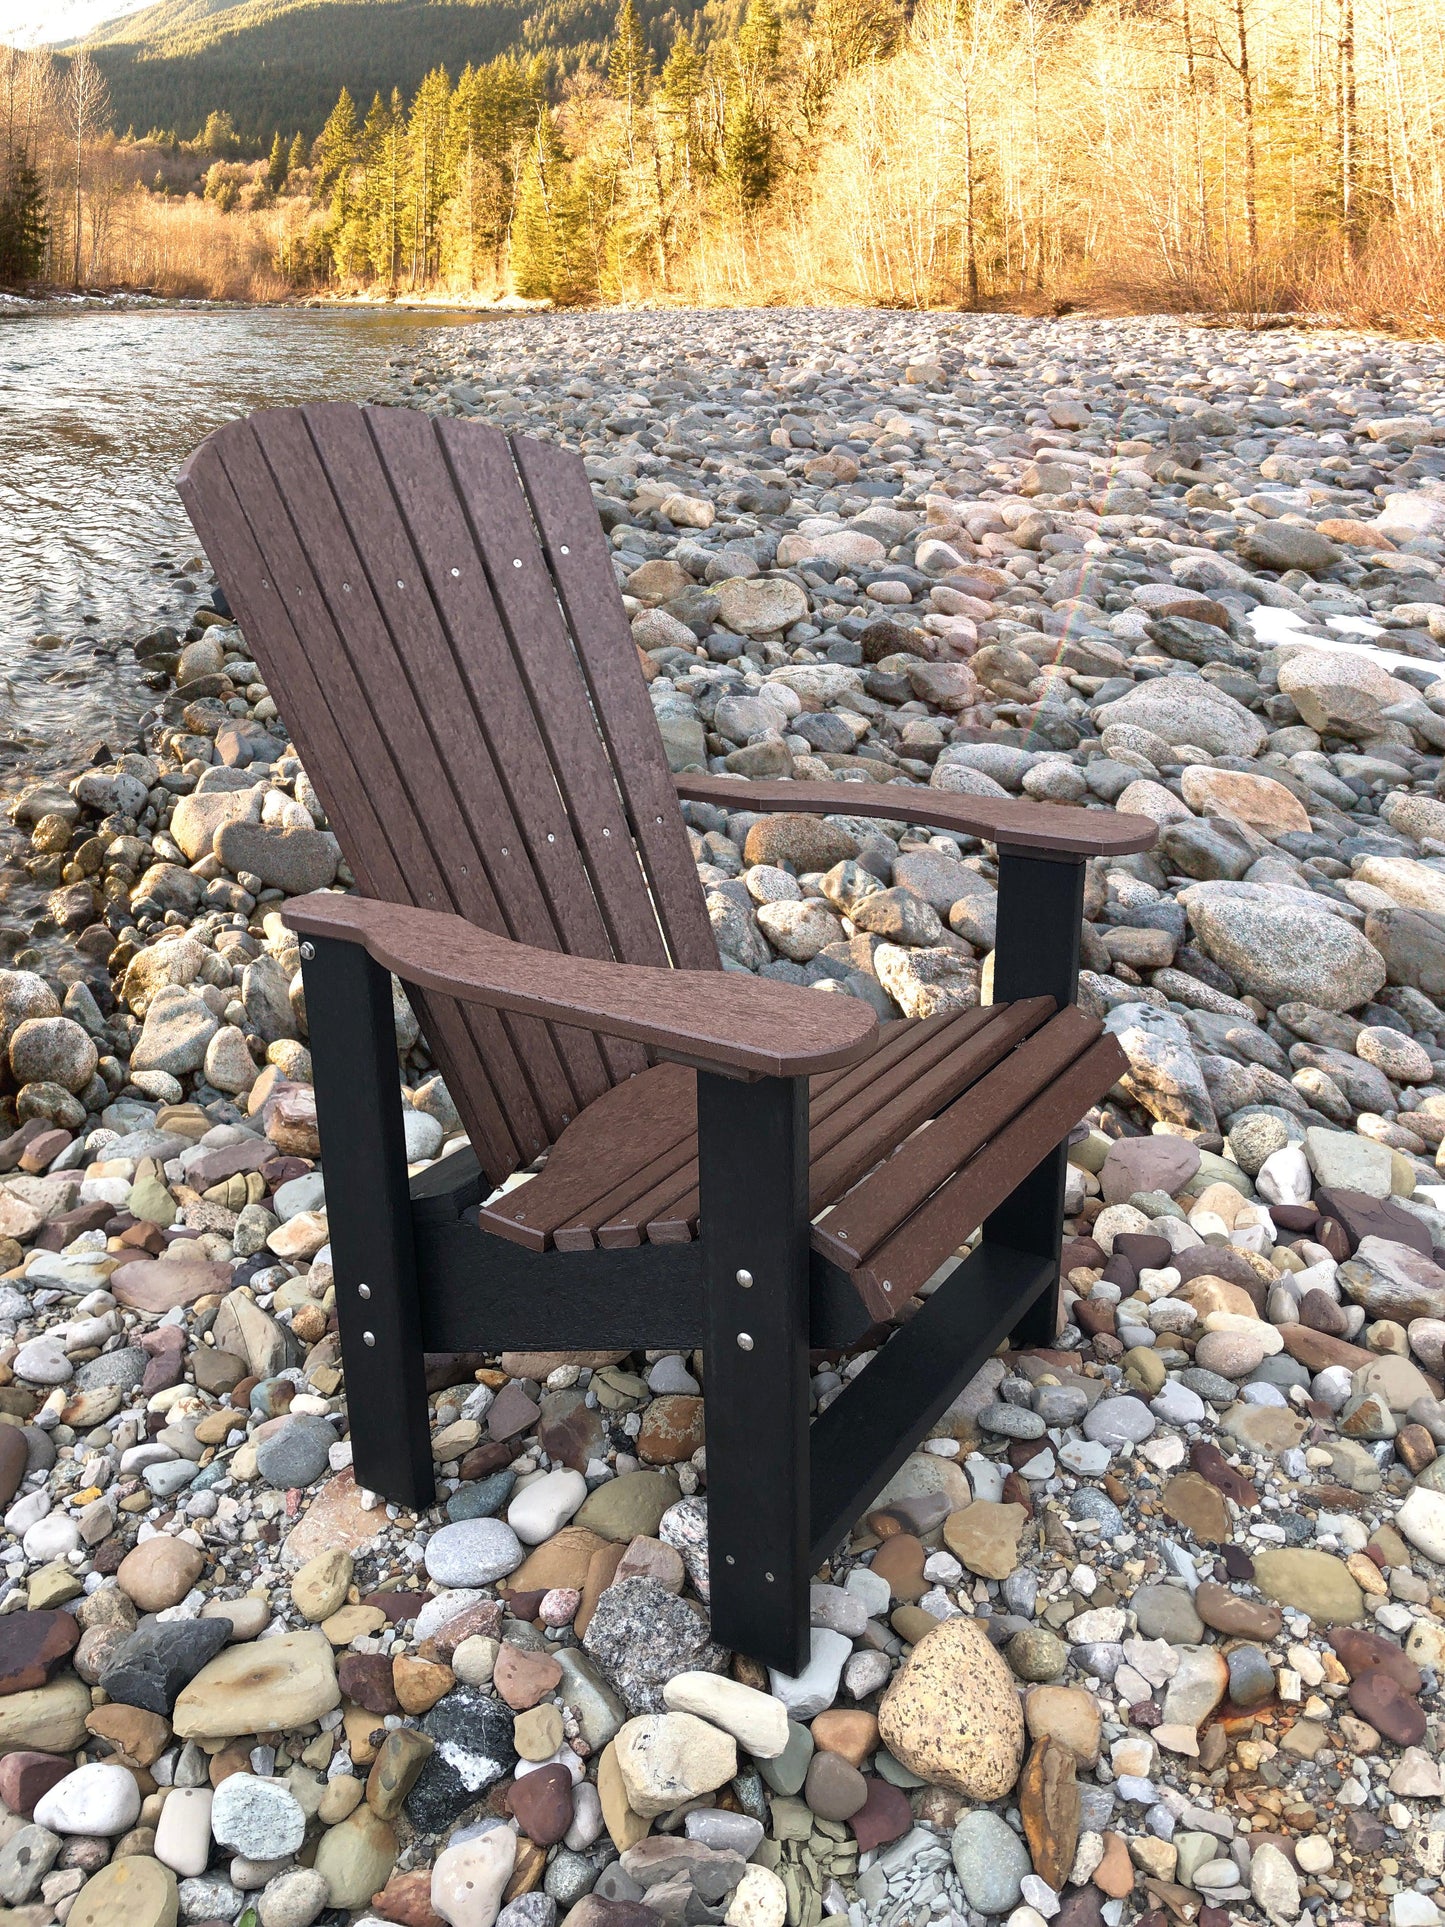 Wildridge LCC-112 Recycled Plastic Heritage Upright Adirondack Chair with Elevated Seat Height (QUICK SHIP) - LEAD TIME TO SHIP 3 TO 4 BUSINESS DAYS